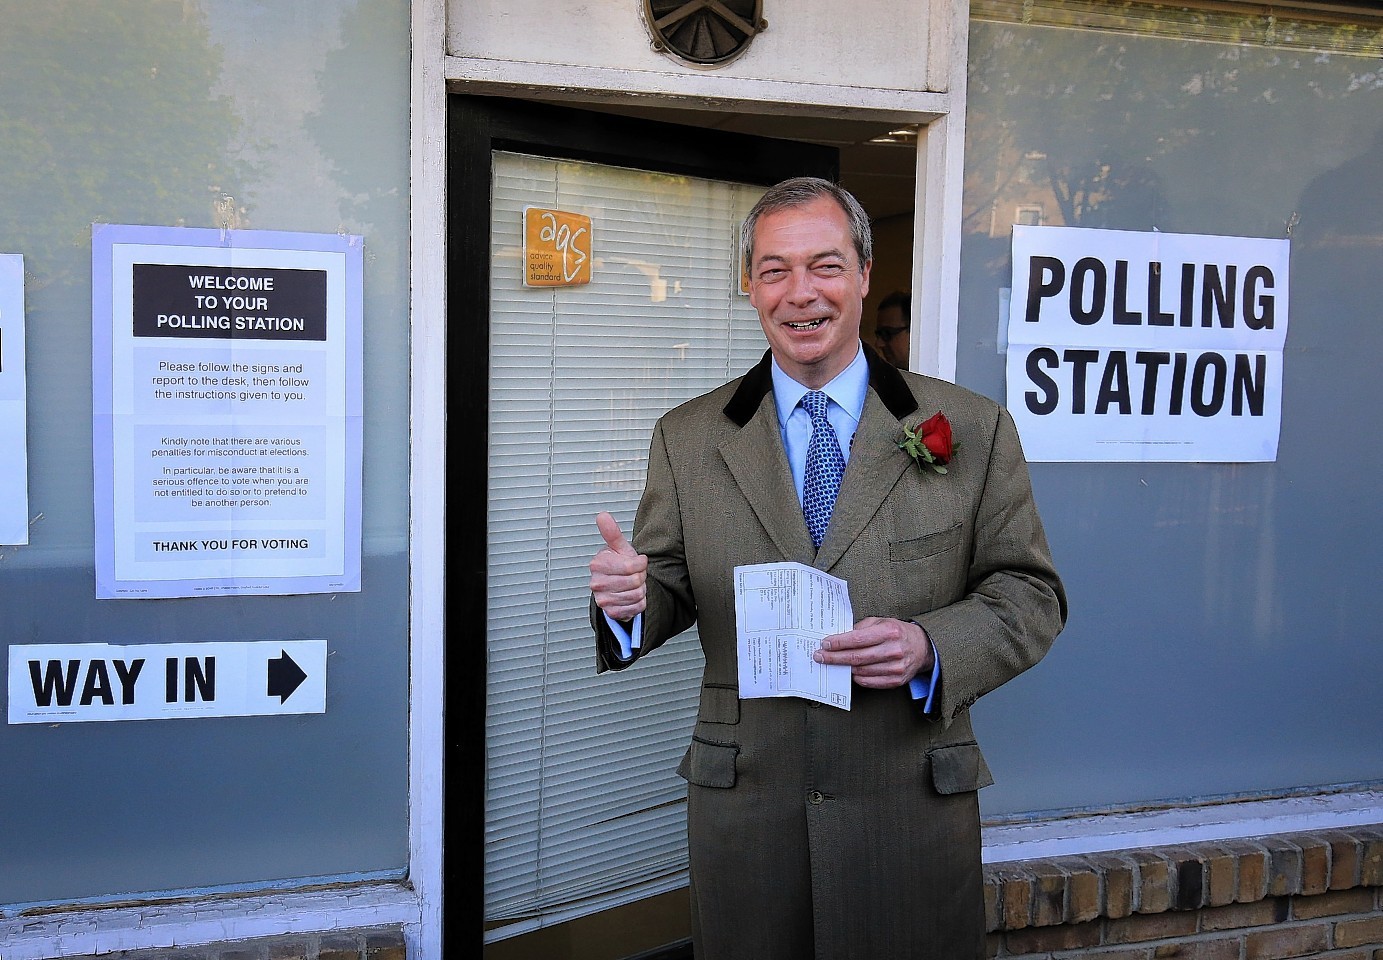 Ukip leader Nigel Farage arrives to cast his vote at the Eastcliff community housing office in Ramsgate